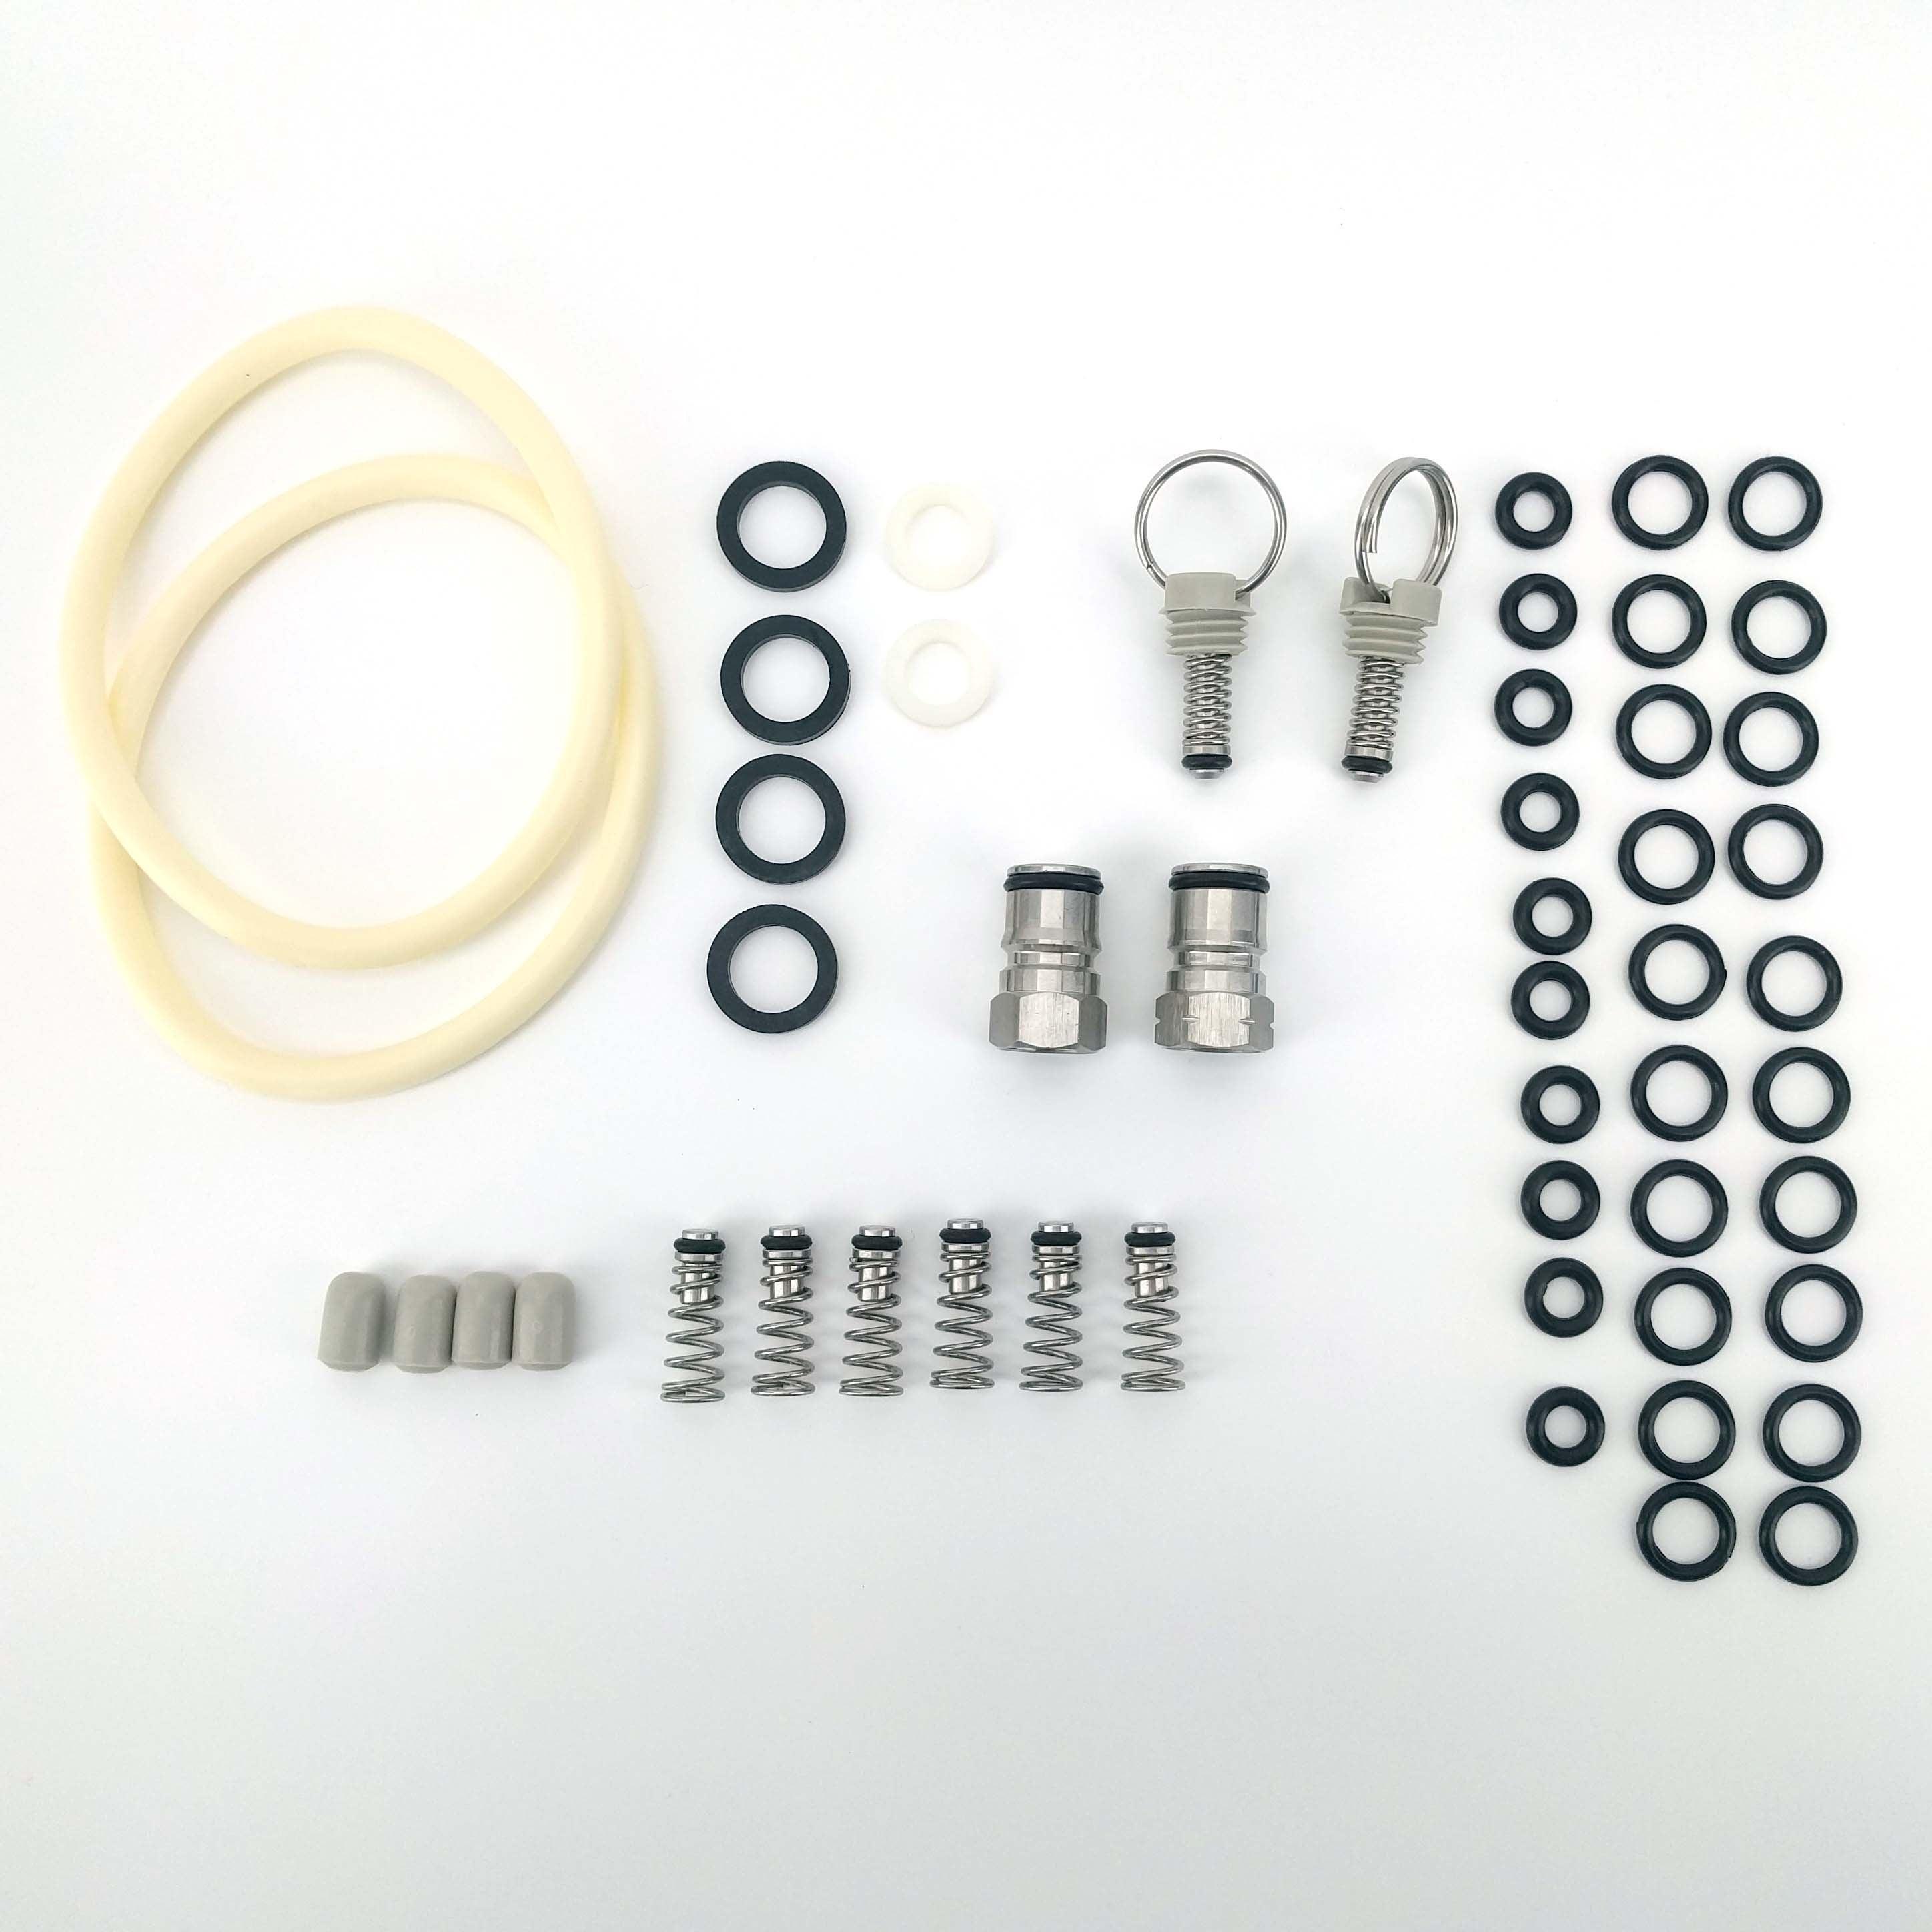 The Complete Kegging Companion Seal Kit (Ball Lock Kegs and Other Spare Parts) - KegLand